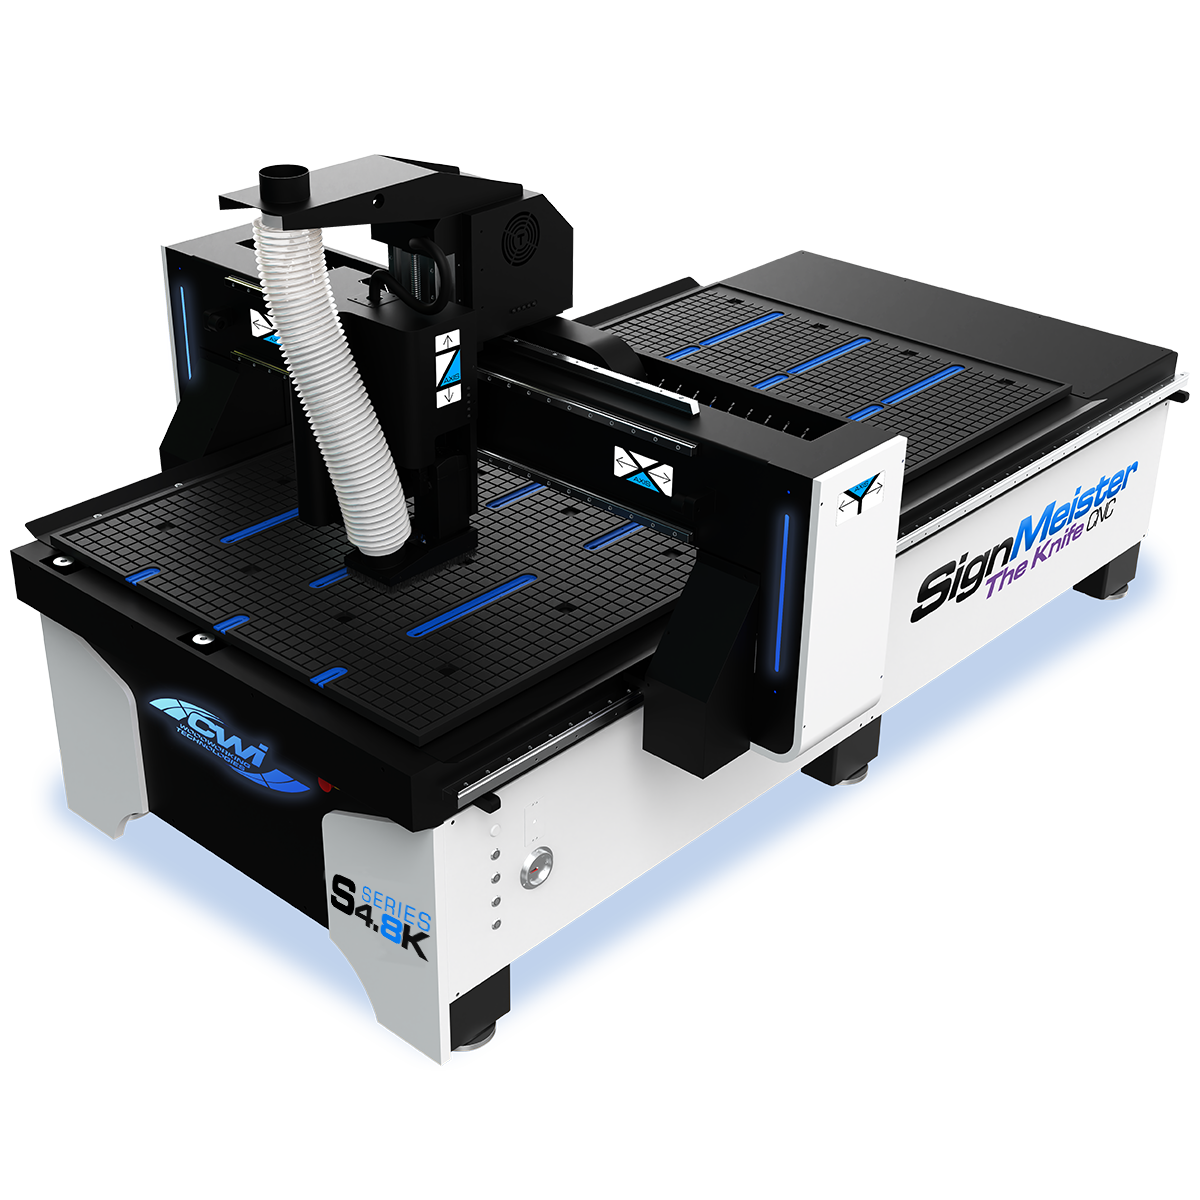 SignMeister V4.8-K CNC Router with Oscillating Knife System